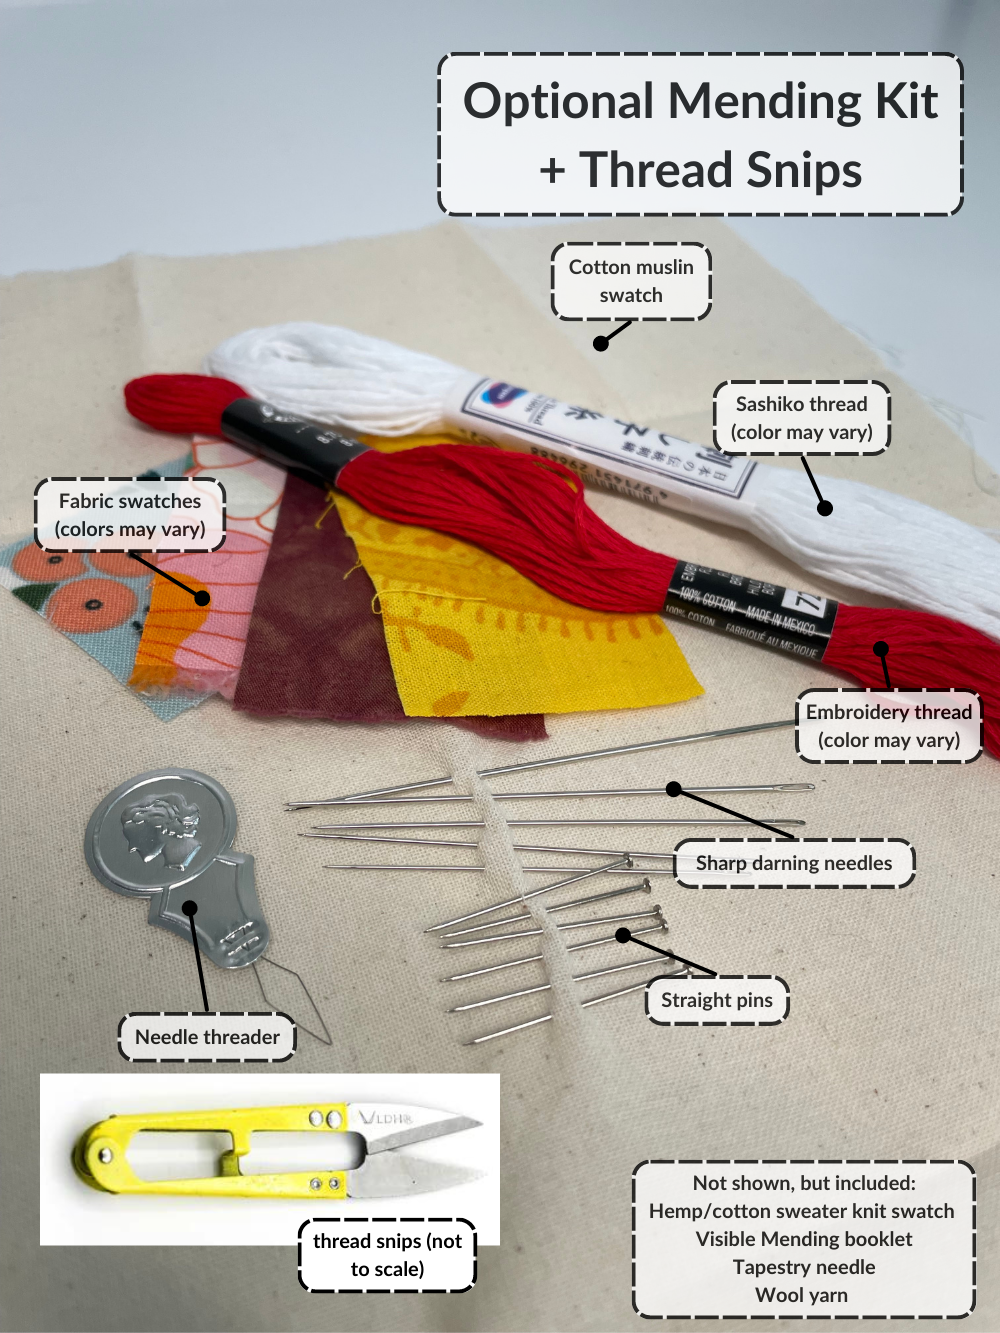 Optional mending kit: cotton muslin swatch, sashiko thread, fabrics swatches, embroidery thread, needle threaders, sharp darning needles, straight pins. Included from not shown: knit sweater swatch, visible mending booklet, tapestry needle, wool yarn, and thread snips. Colors may vary for thread colors and fabric swatches. 